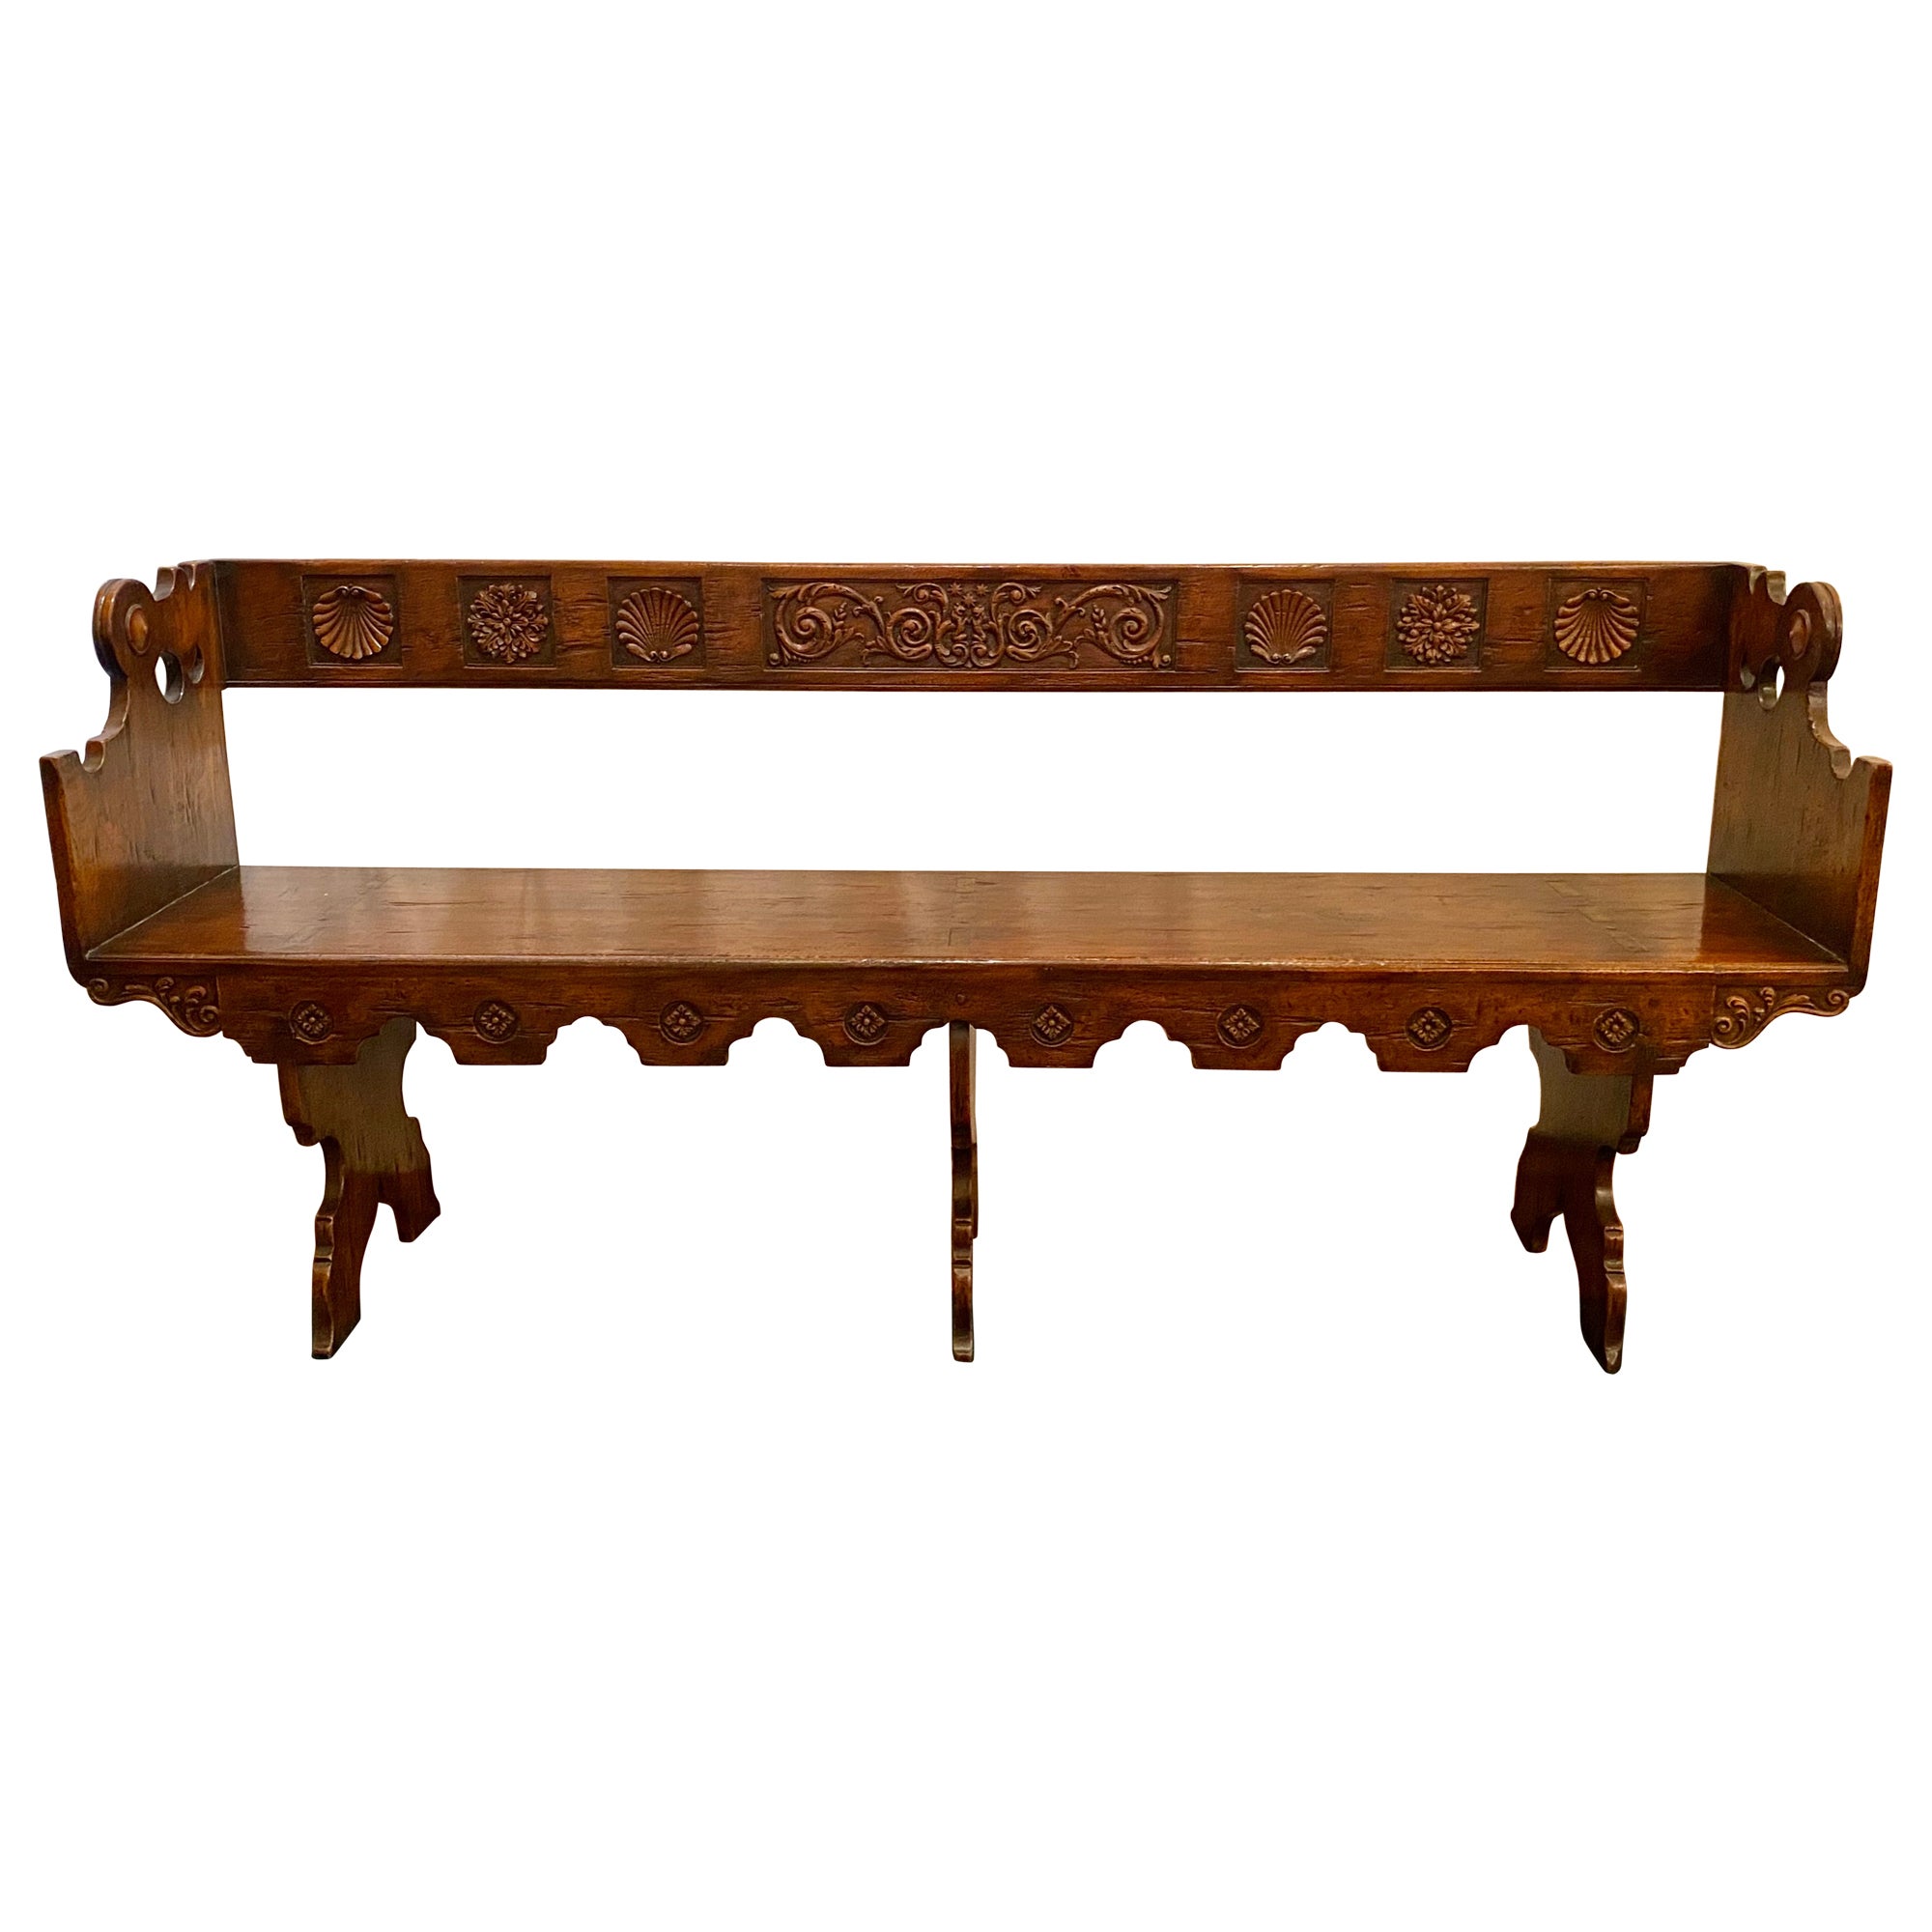 Antique 19th Century French Carved Walnut Banquette Bench, circa 1880 For Sale